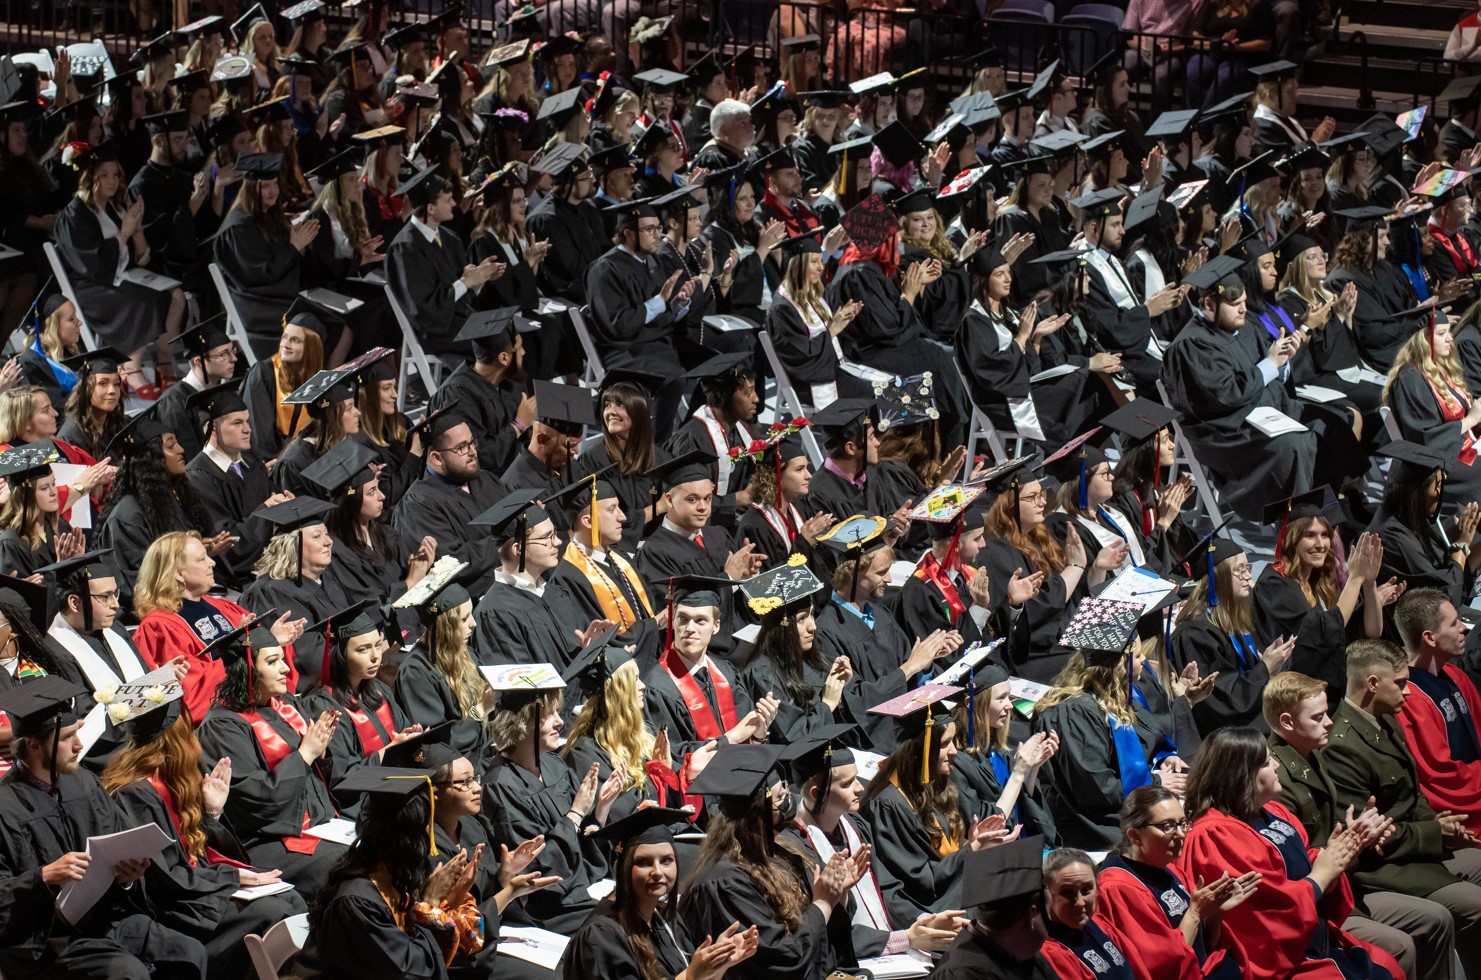 USI To Hold Two Fall Commencement Ceremonies To Honor Fall 2022